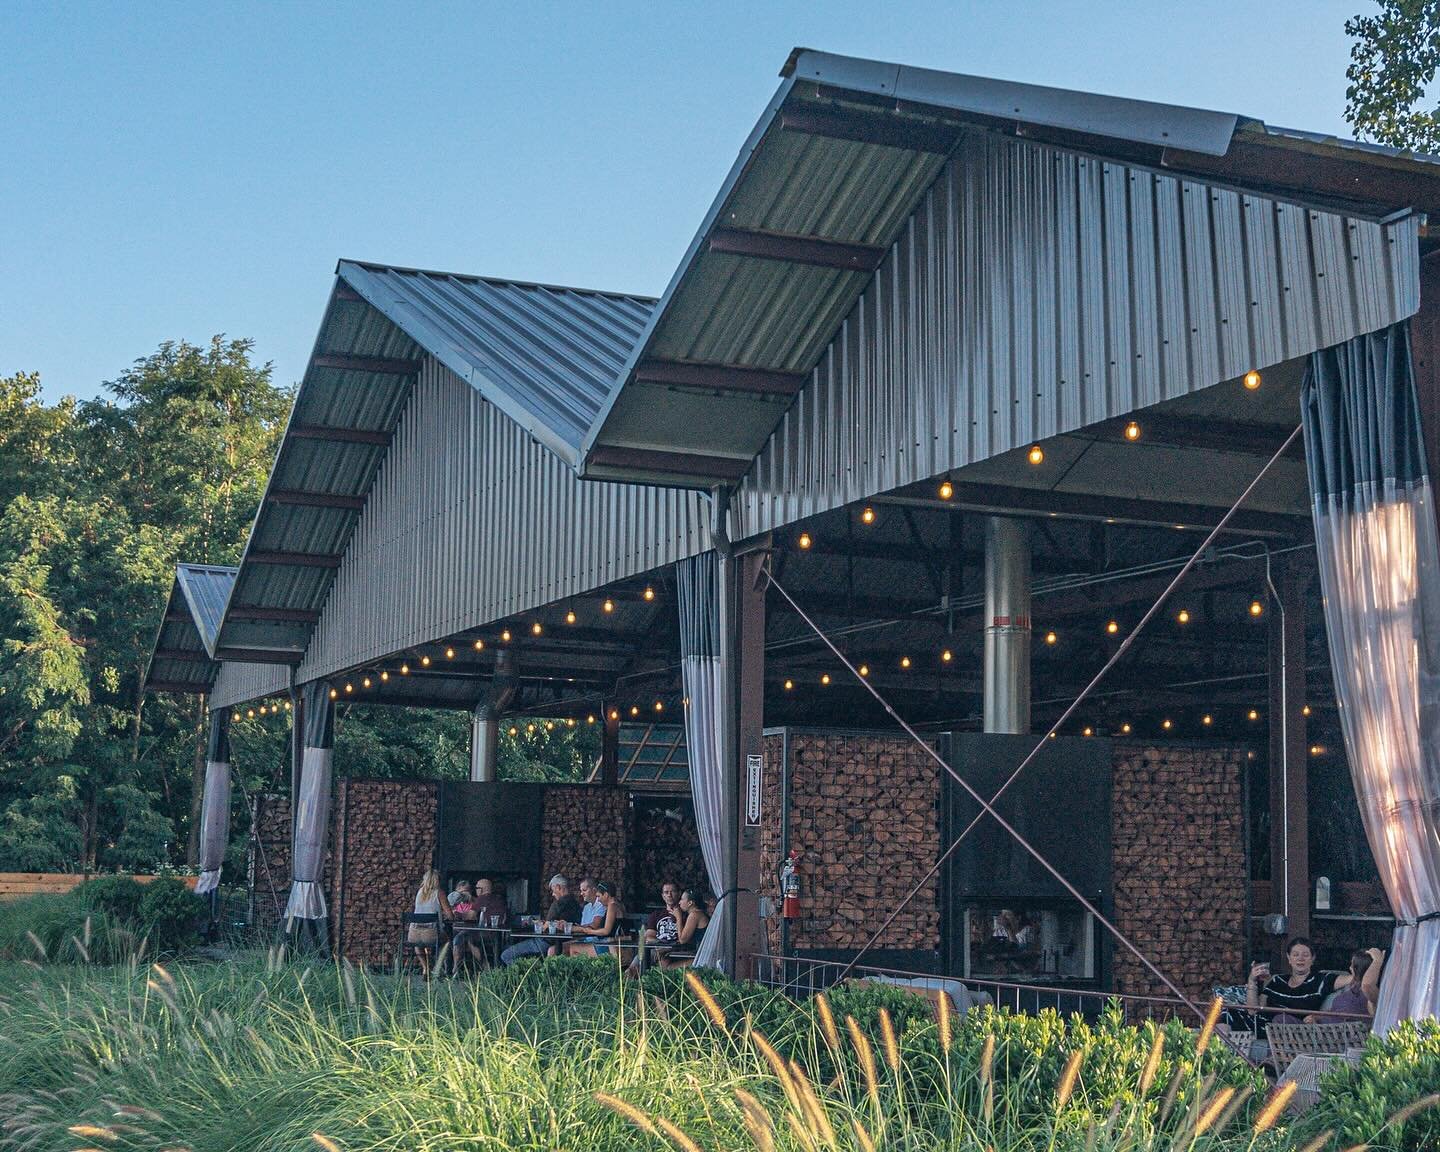 Spring is calling &amp; River Pavilion is answering! We reopen our doors on May 10th with a weekend of live music, breathtaking Hudson views &amp; farm-fresh delights prepared in our wood-fired oven. Book your reservation using the link in our bio. #